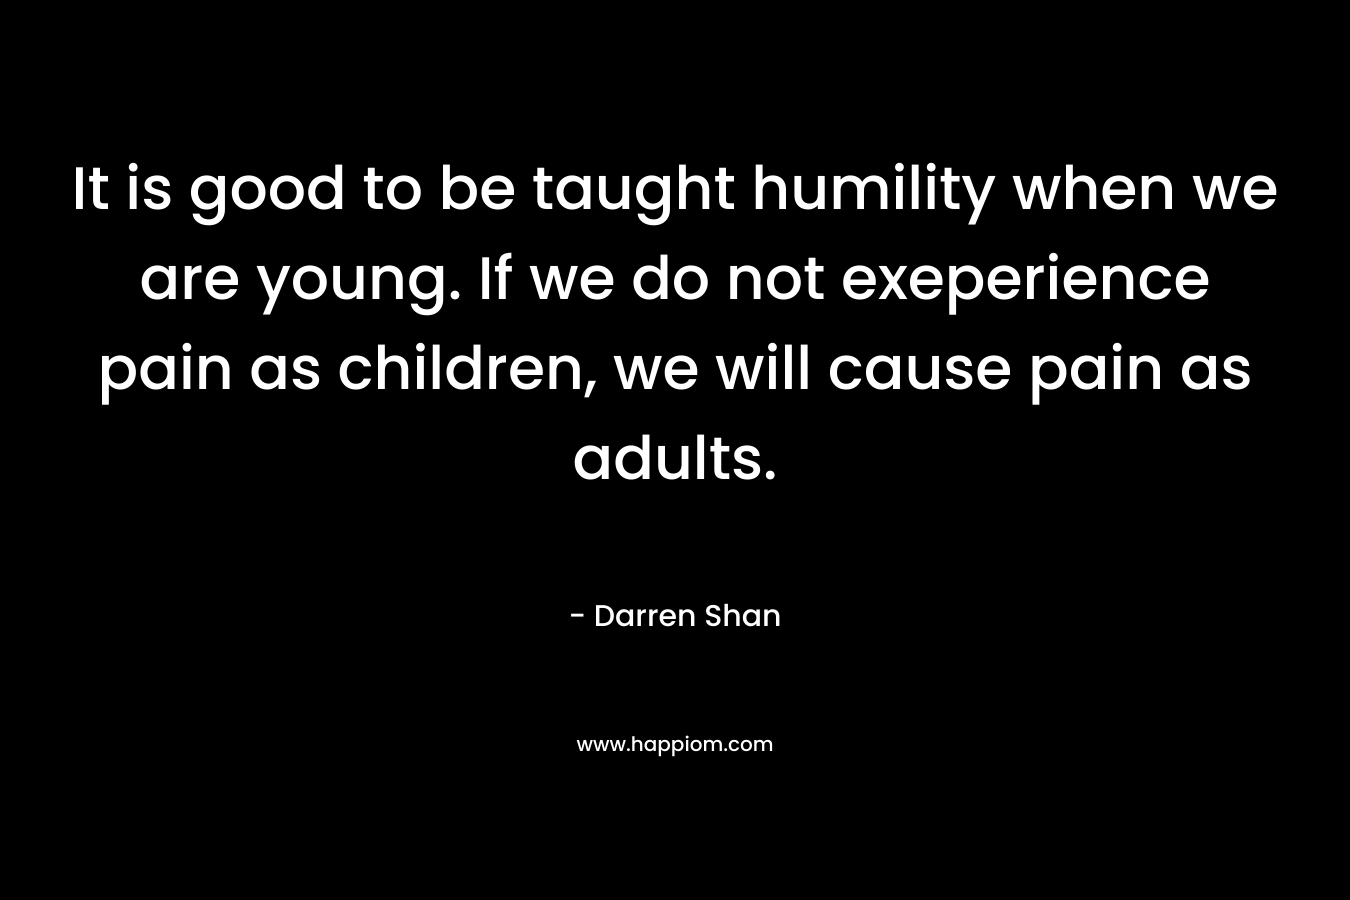 It is good to be taught humility when we are young. If we do not exeperience pain as children, we will cause pain as adults.